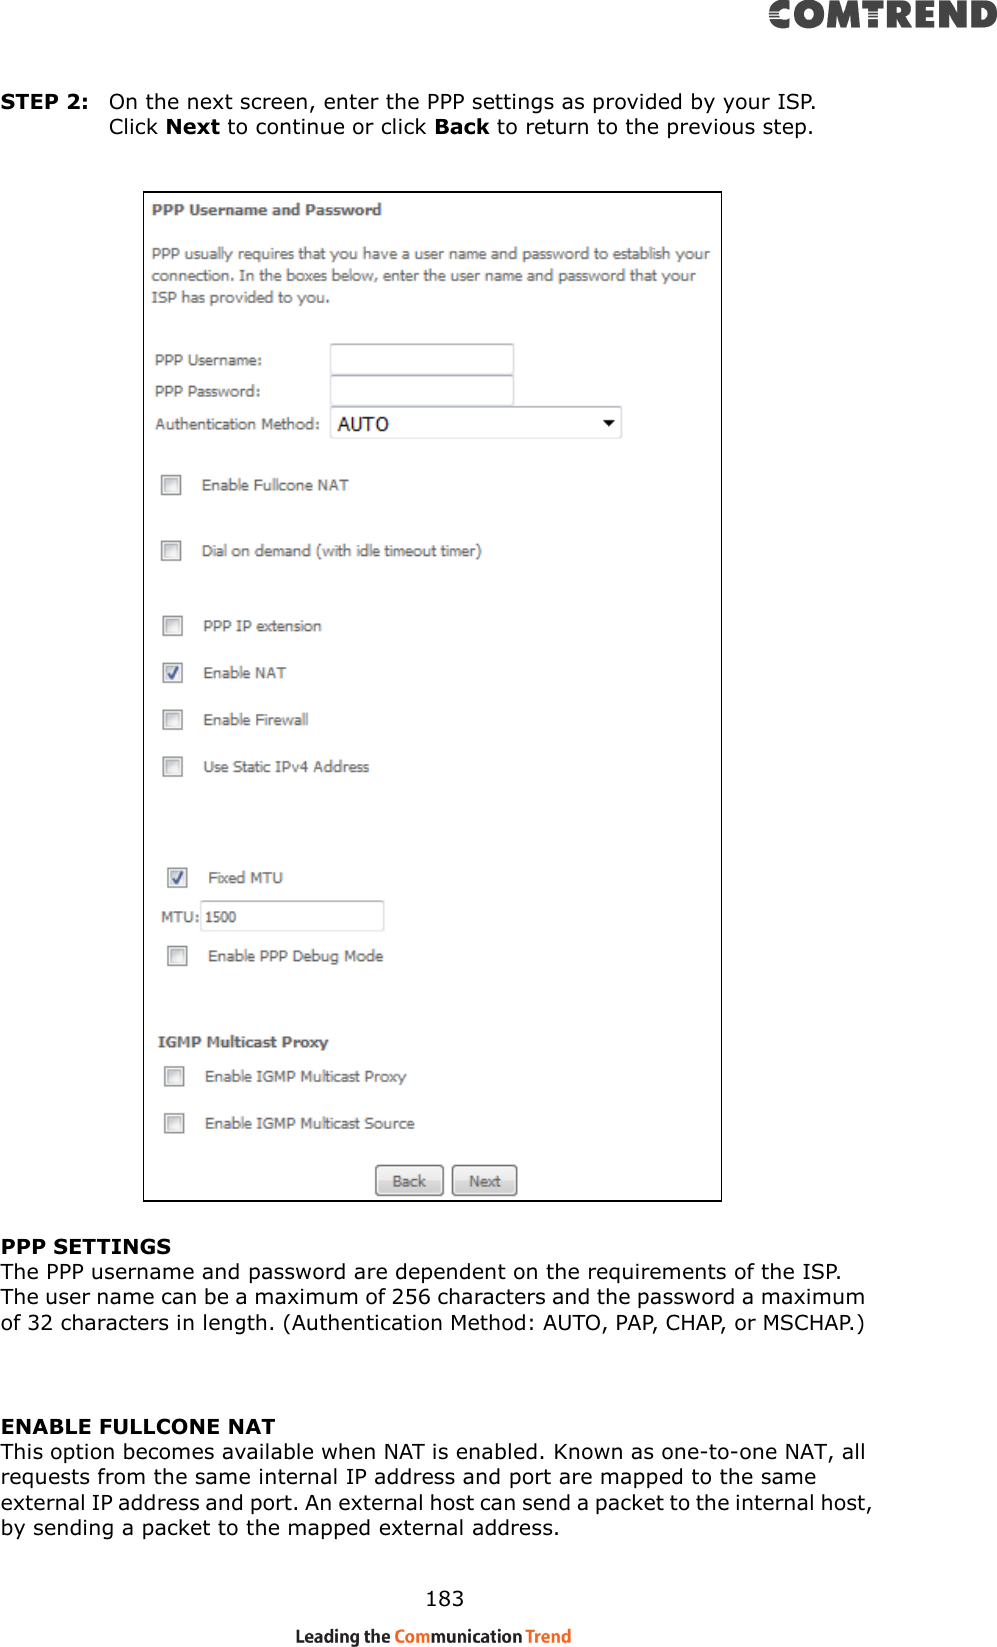    183 STEP 2:  On the next screen, enter the PPP settings as provided by your ISP.   Click Next to continue or click Back to return to the previous step.      PPP SETTINGS The PPP username and password are dependent on the requirements of the ISP.   The user name can be a maximum of 256 characters and the password a maximum of 32 characters in length. (Authentication Method: AUTO, PAP, CHAP, or MSCHAP.)   ENABLE FULLCONE NAT This option becomes available when NAT is enabled. Known as one-to-one NAT, all requests from the same internal IP address and port are mapped to the same external IP address and port. An external host can send a packet to the internal host, by sending a packet to the mapped external address. 